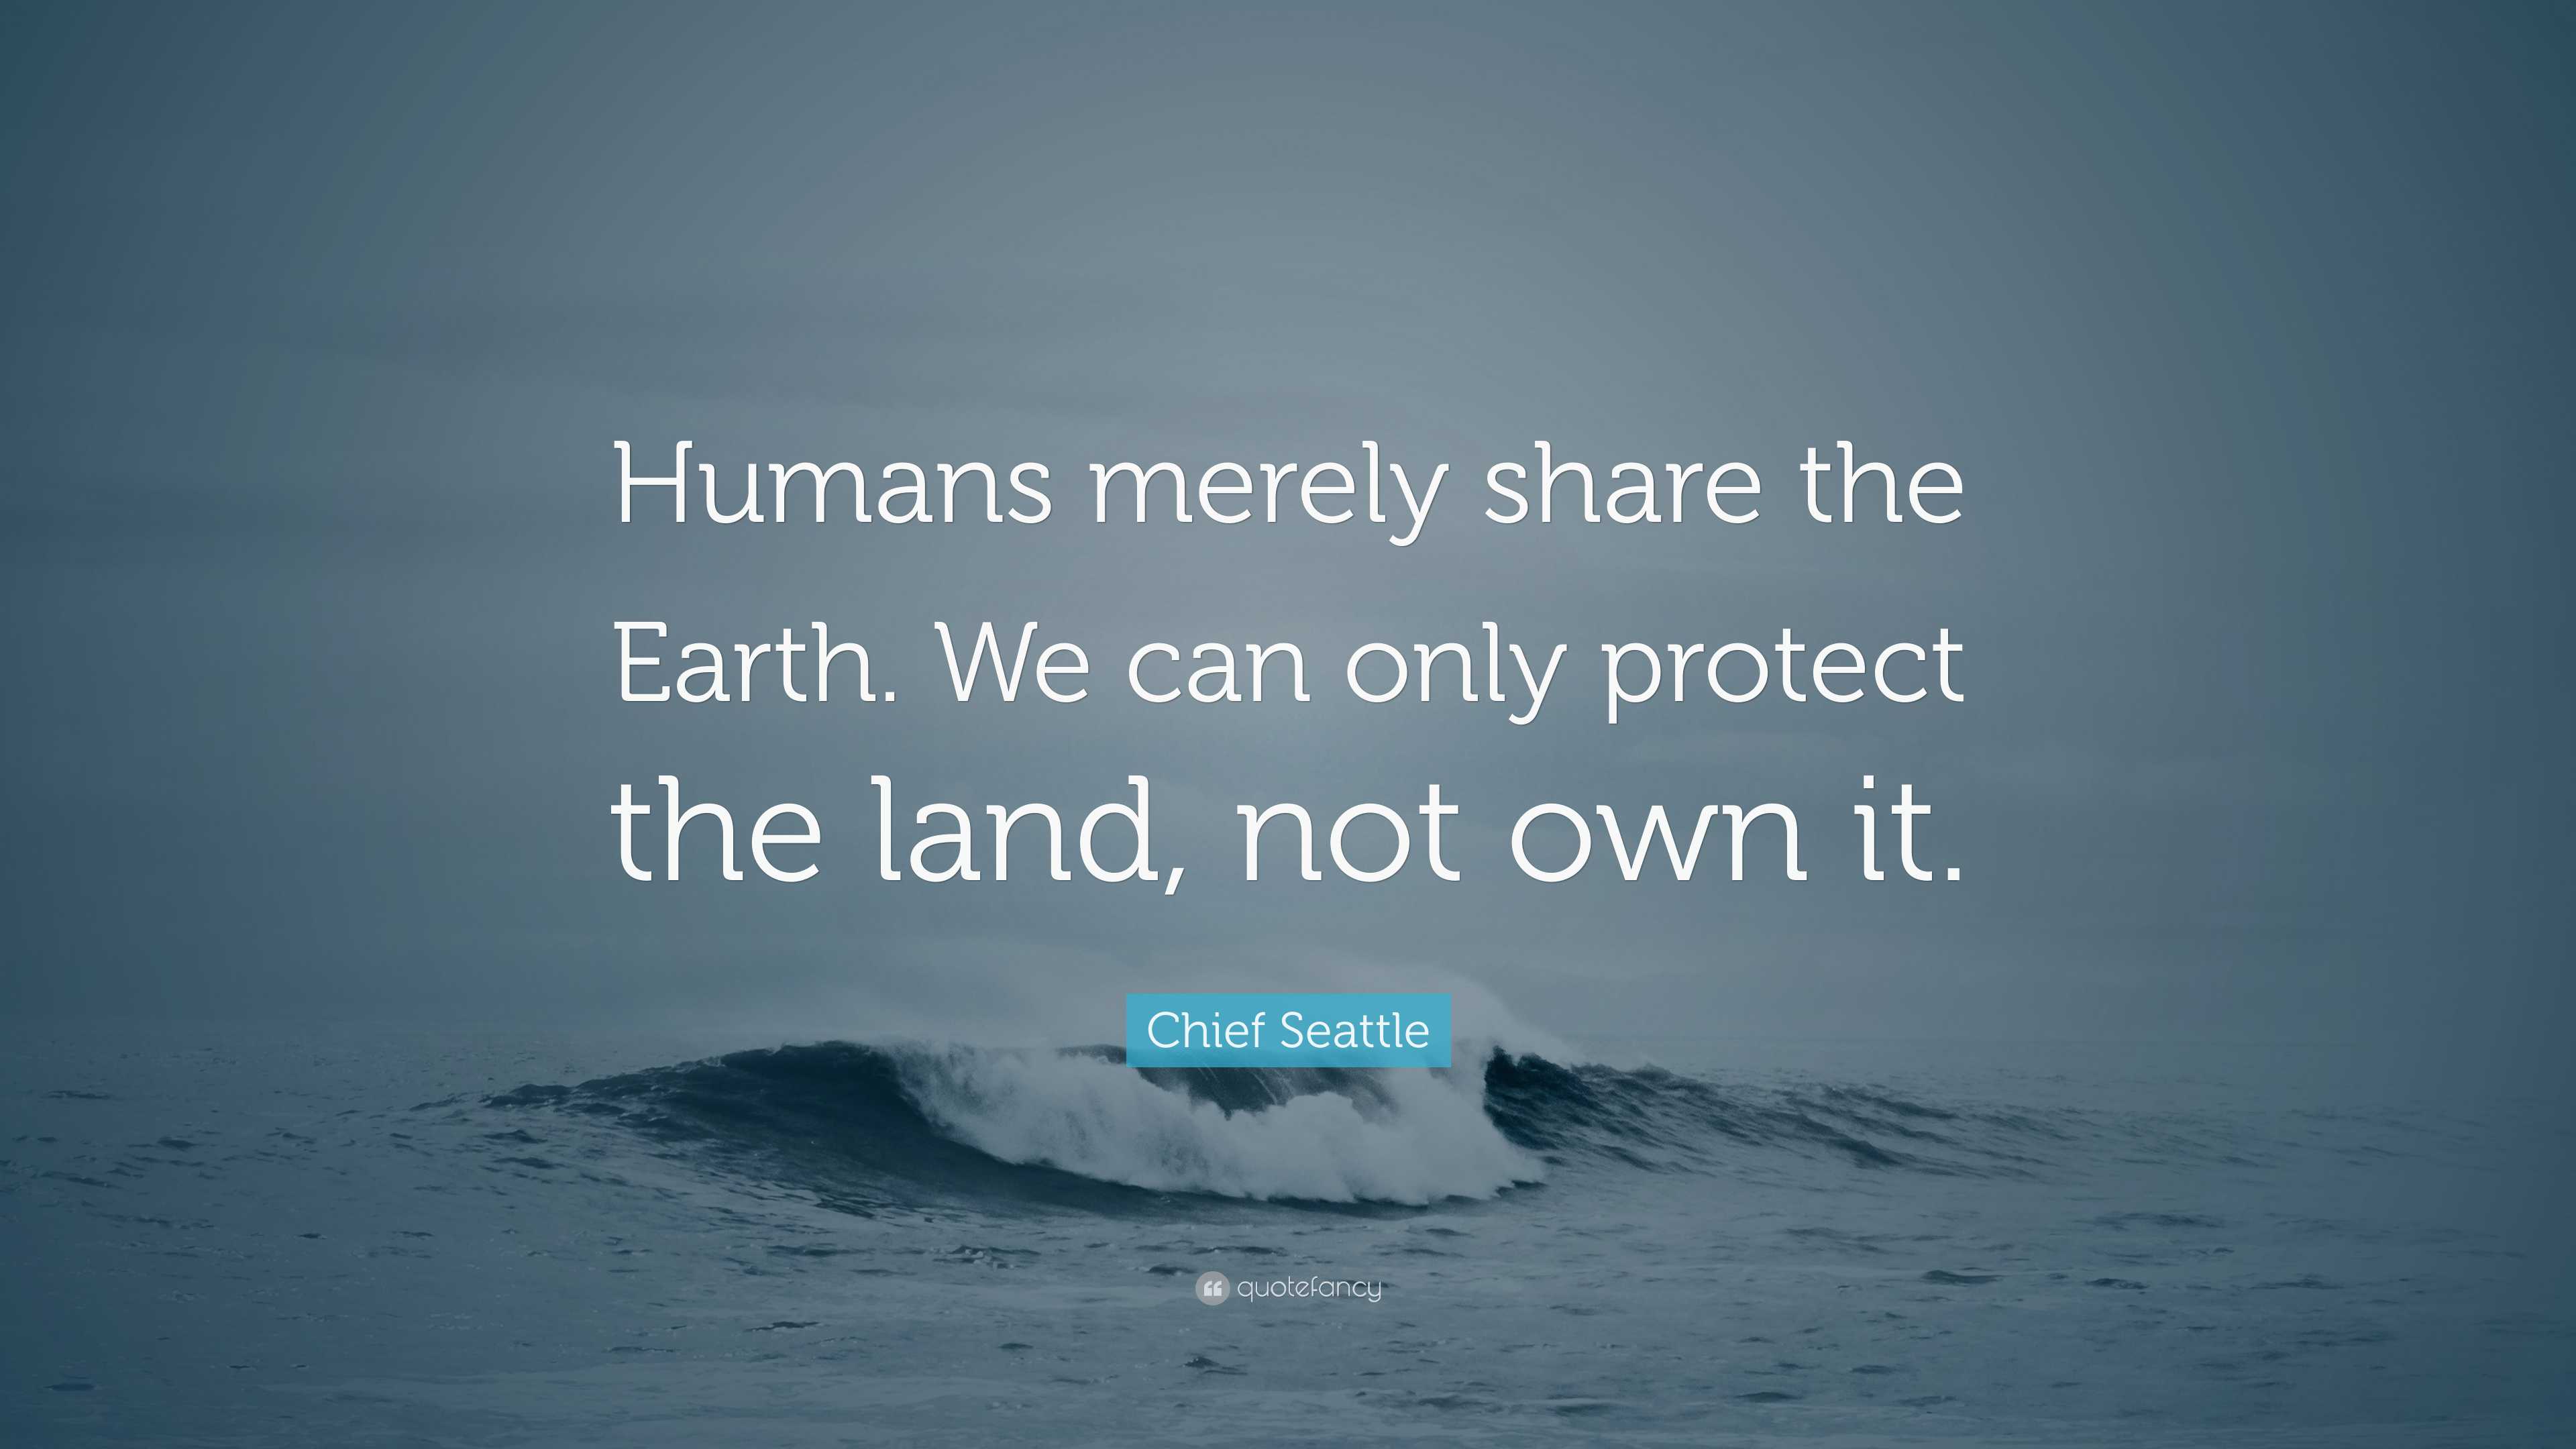 Chief Seattle Quote: “Humans merely share the Earth. We can only protect  the land, not own